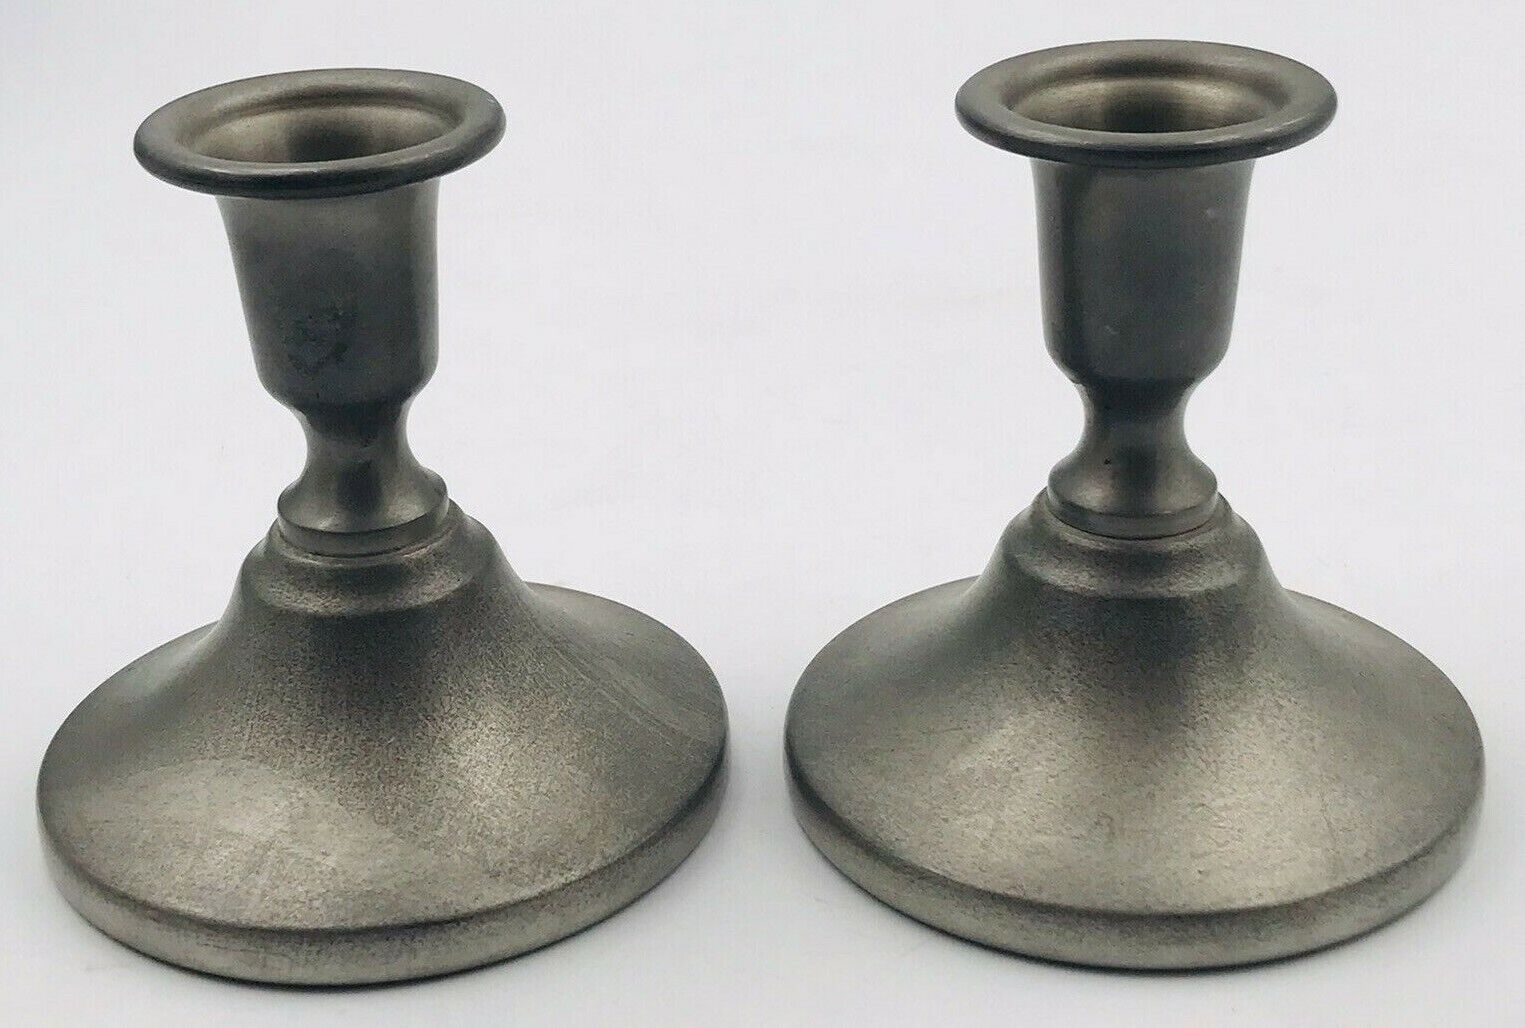 Two (2) Vintage Preisner Pewter Candle Holders 2164 Satin Finish Traditional